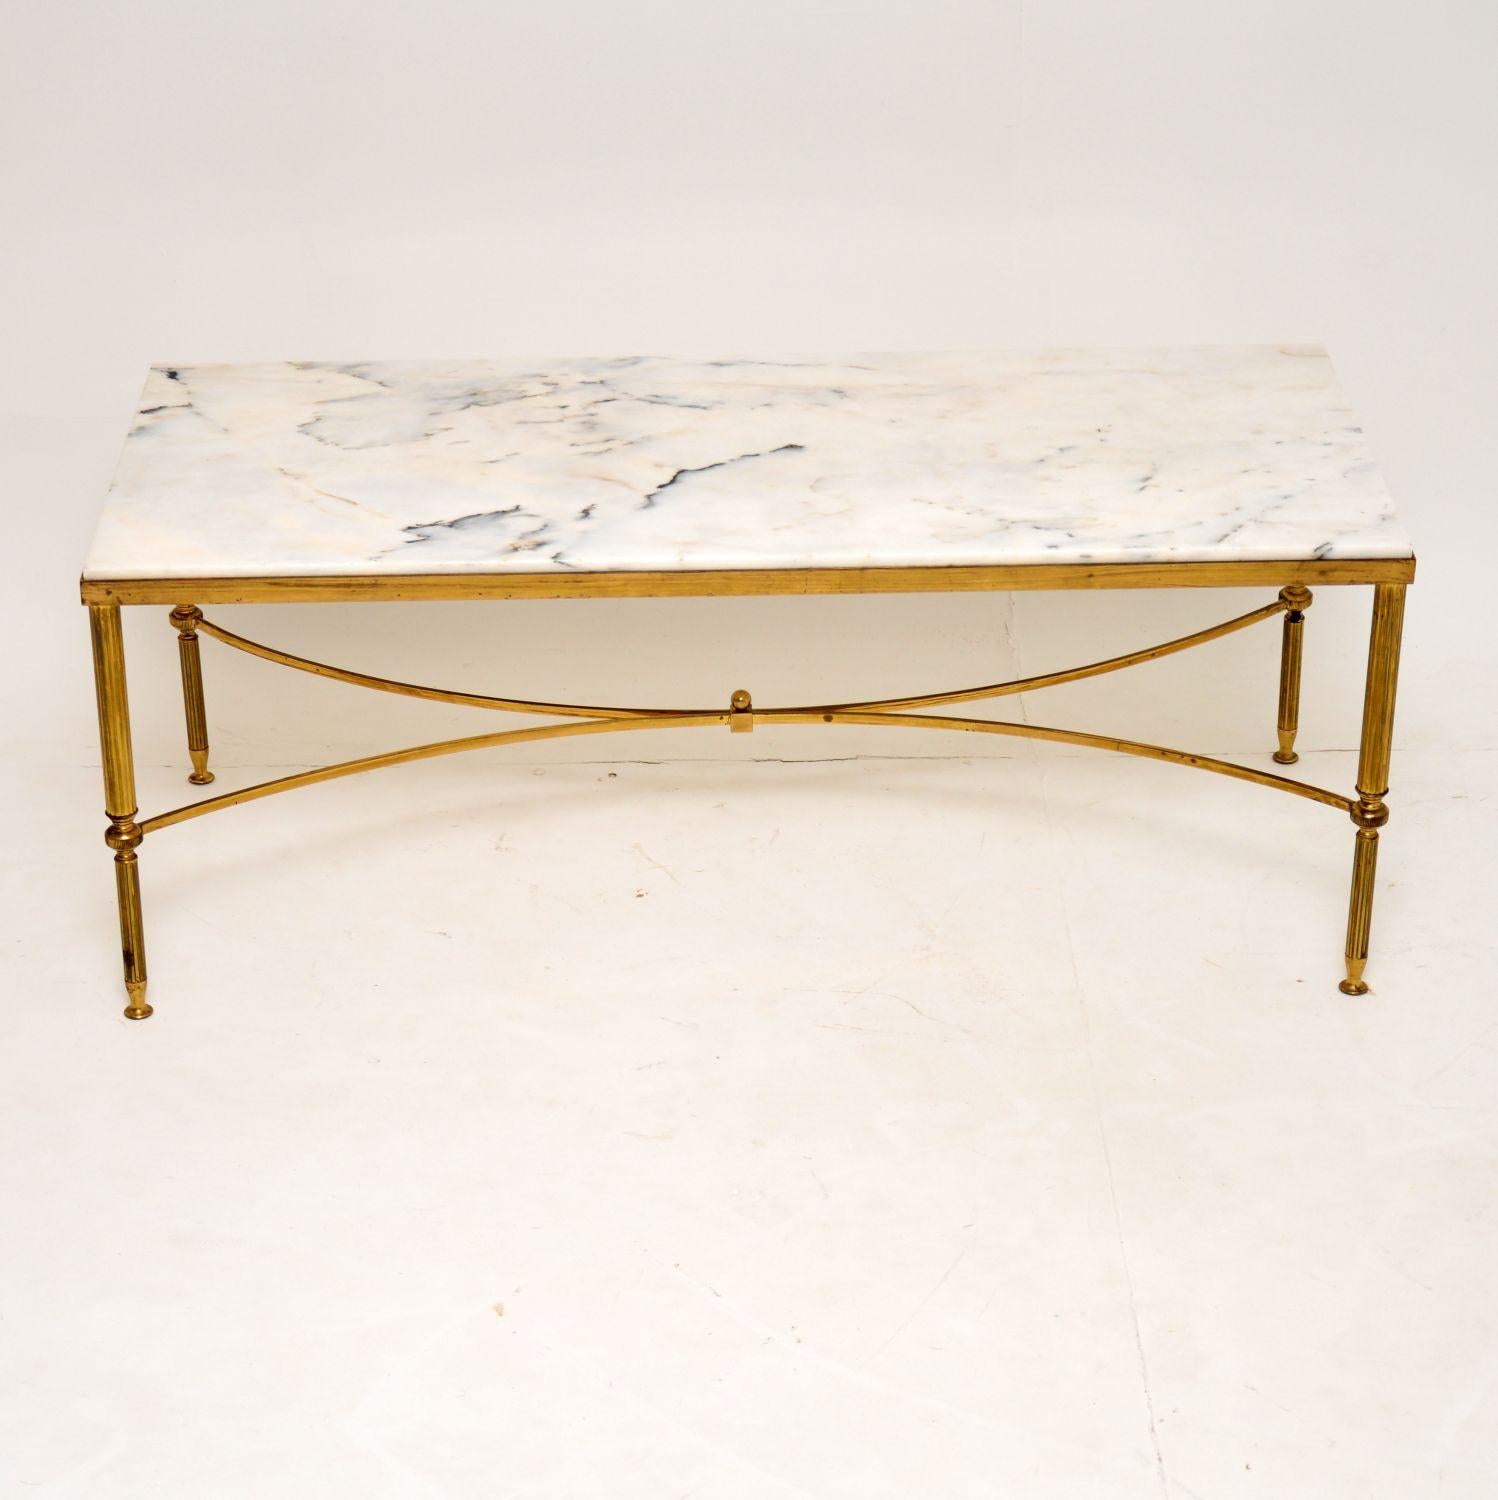 A stunning vintage coffee table in brass and marble, this was made in Italy. It dates from the 1950s-1960s, and is in excellent original condition. The frame is clean, sturdy and sound, with some minor tarnishing here and there, commensurate for